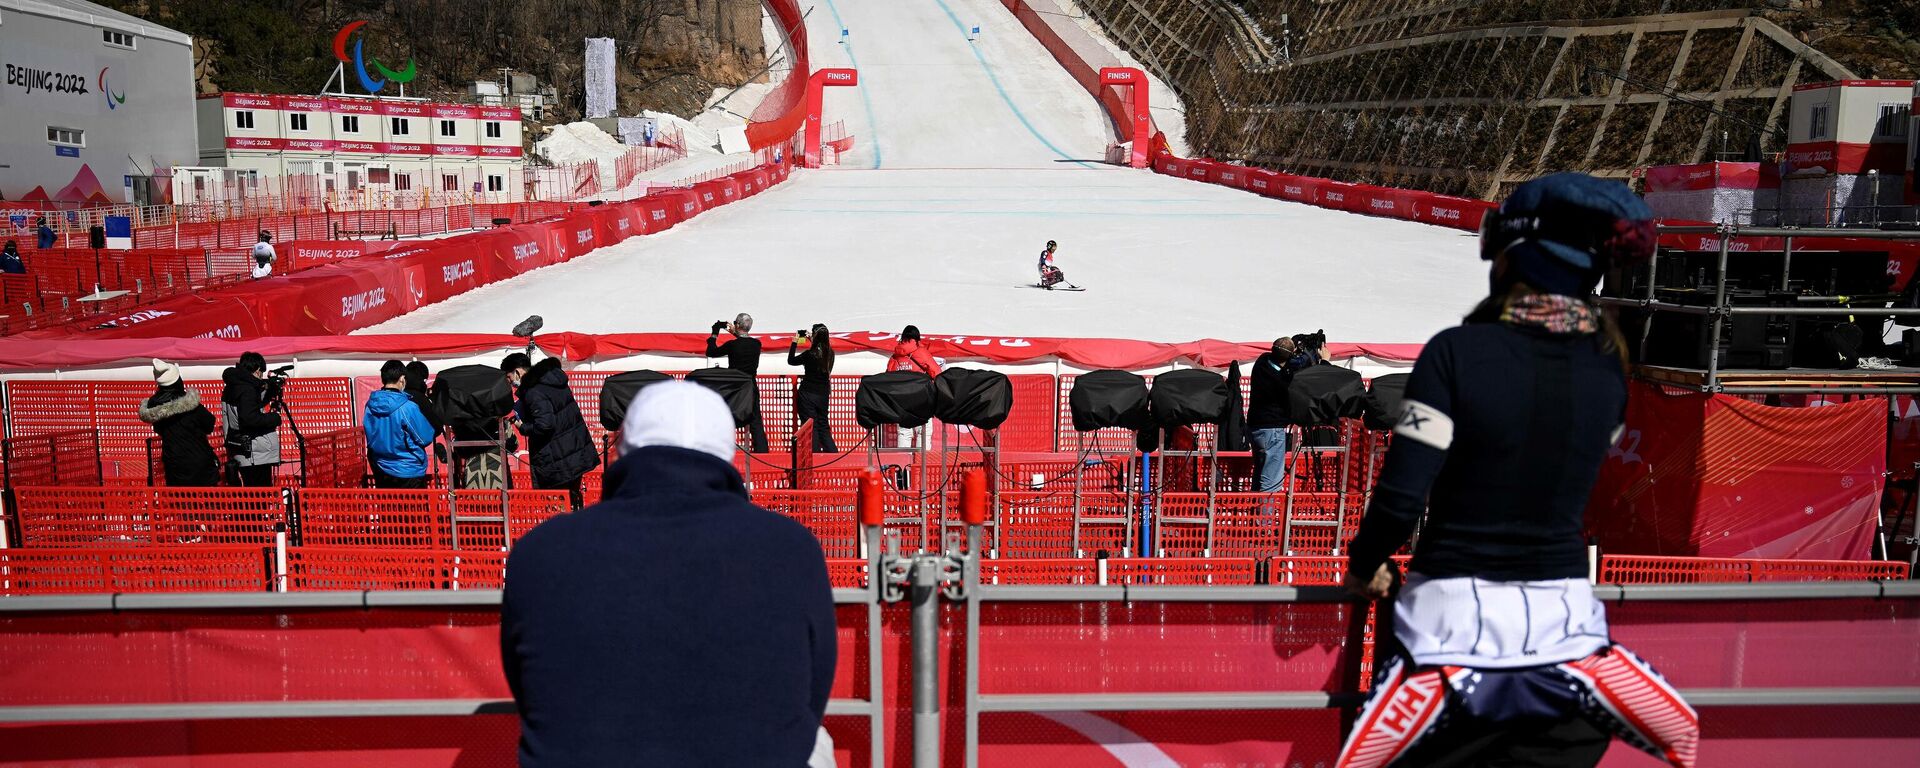 A paralympic athlete crosses the finish line during a training session for the men's downhill sitting event at the Yanqing National Alpine Skiing Centre in Yanqing ahead of the Beijing 2022 Winter Paralympic Games on March 3, 2022. - Sputnik International, 1920, 04.03.2022